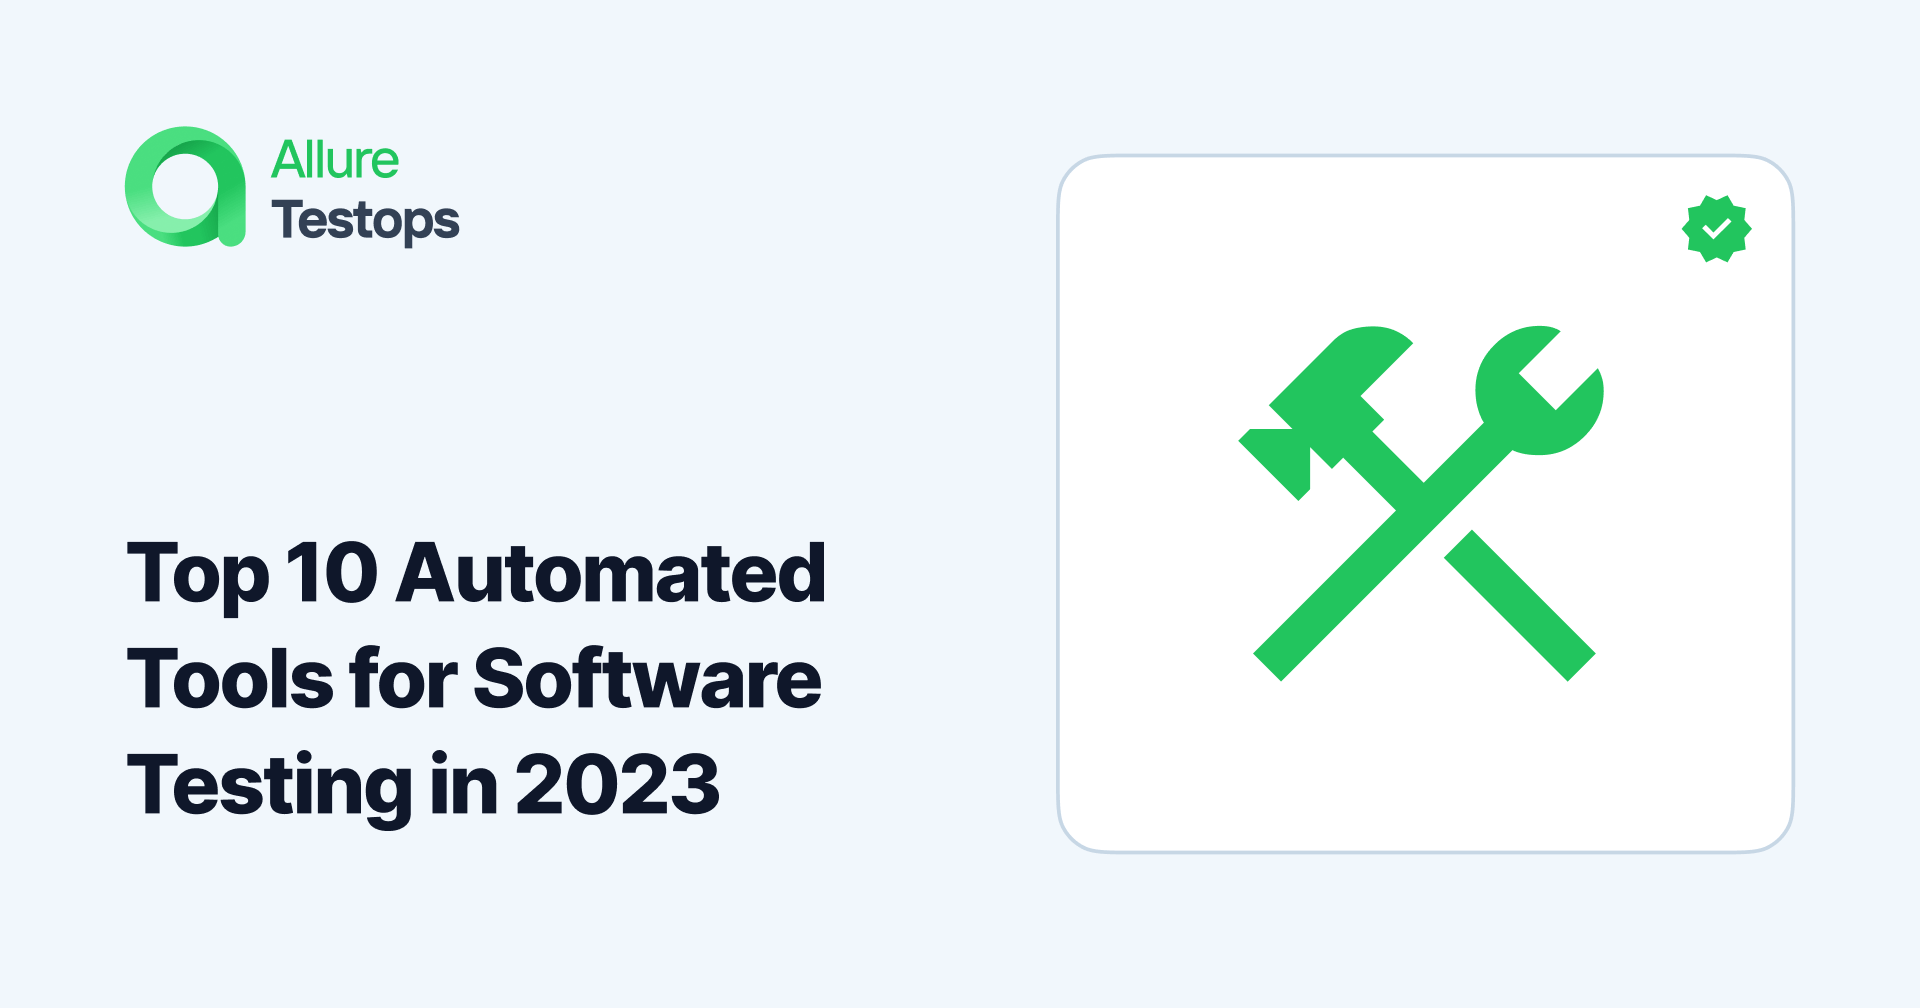 Top 10 Automated Tools for Software Testing in 2023